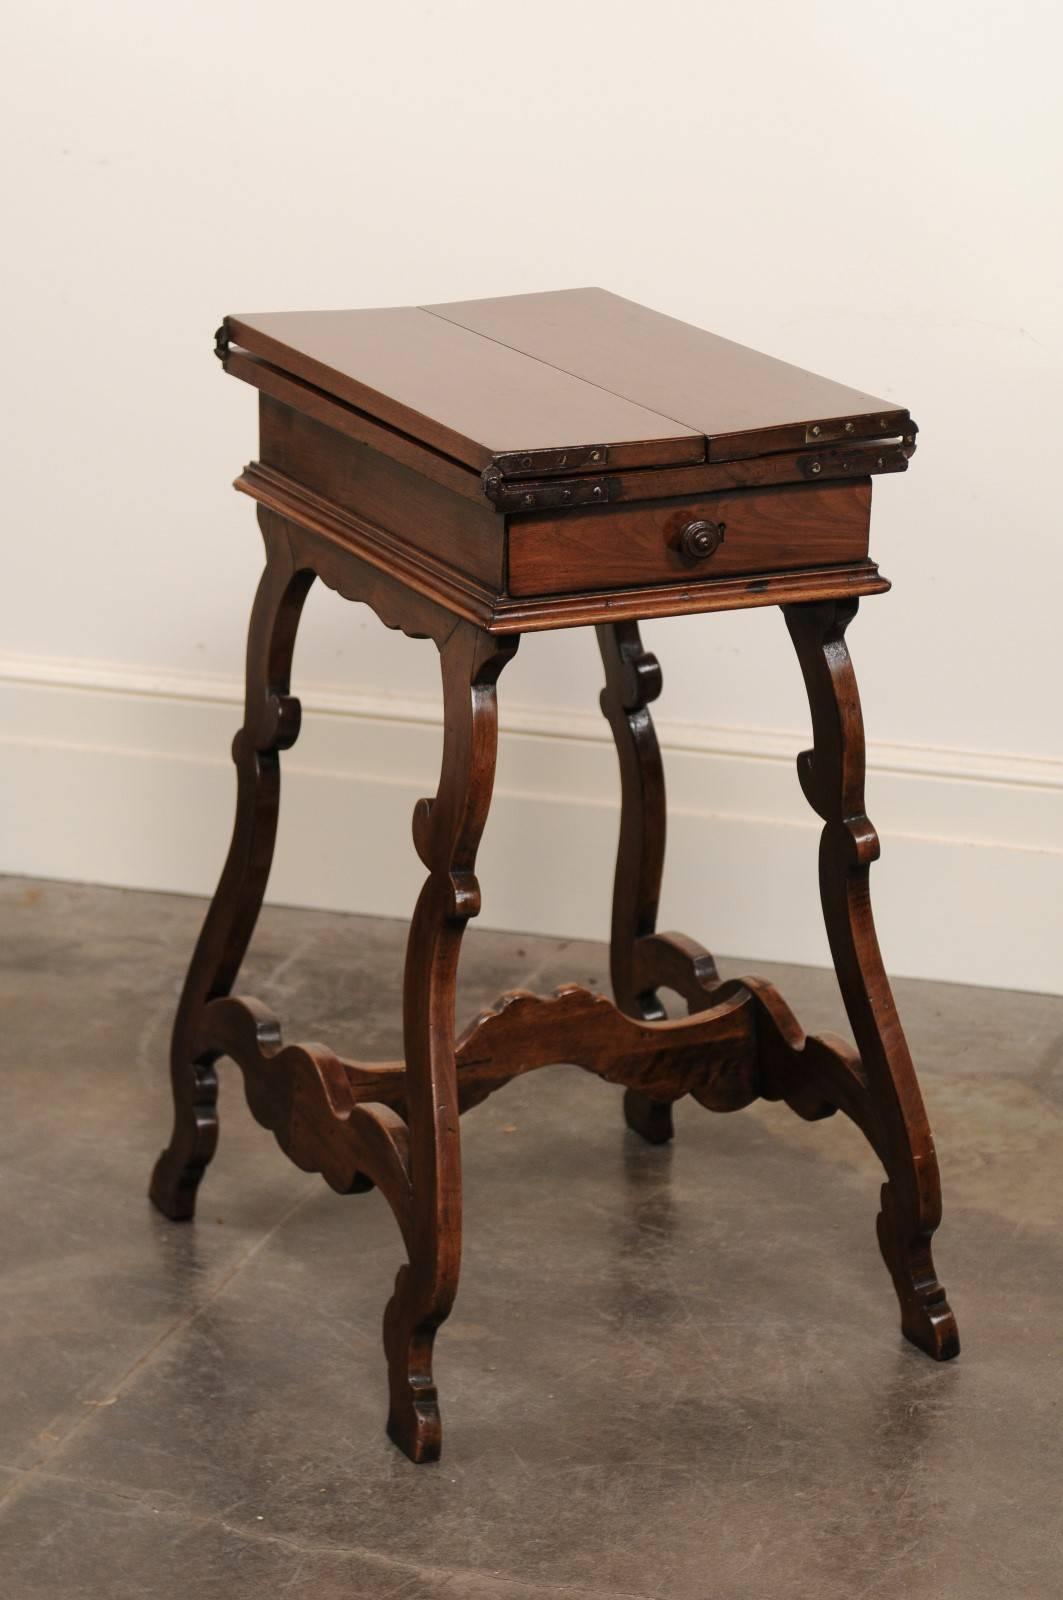 This Italian walnut side table from the early 19th century features an exquisite rectangular top that unfolds to reveal two small leaves, beautifully decorated in the corners and secured with brass hinges. This top sits above a single dovetailed